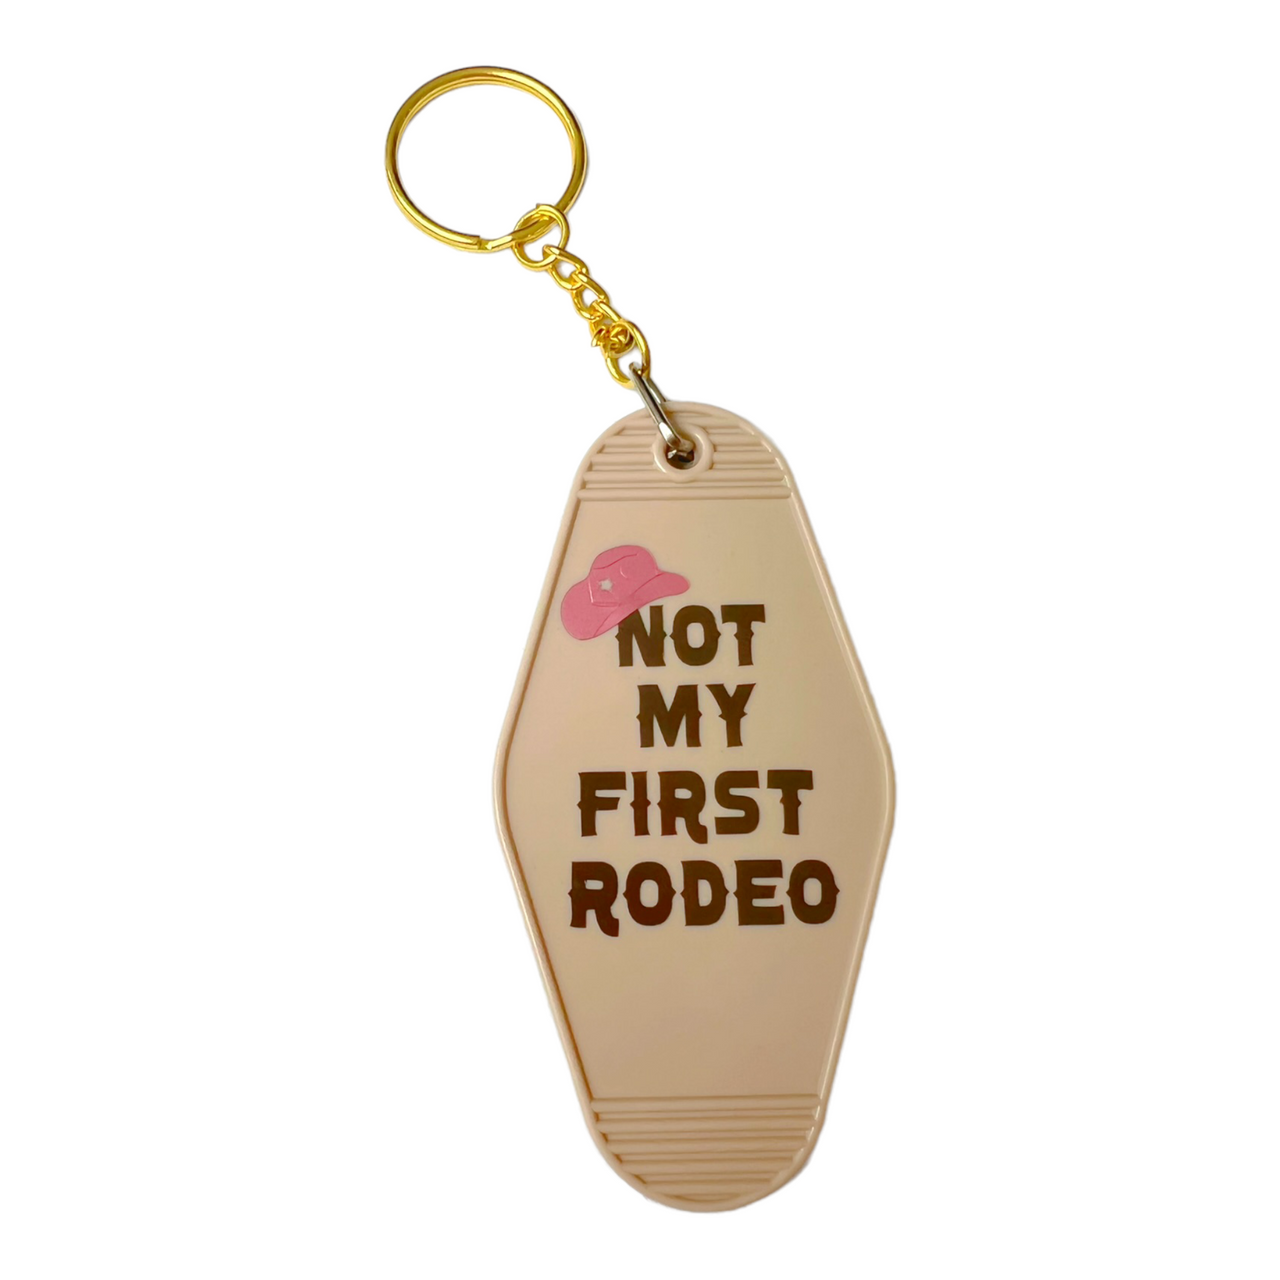 'Not my first rodeo' Motel Keychain